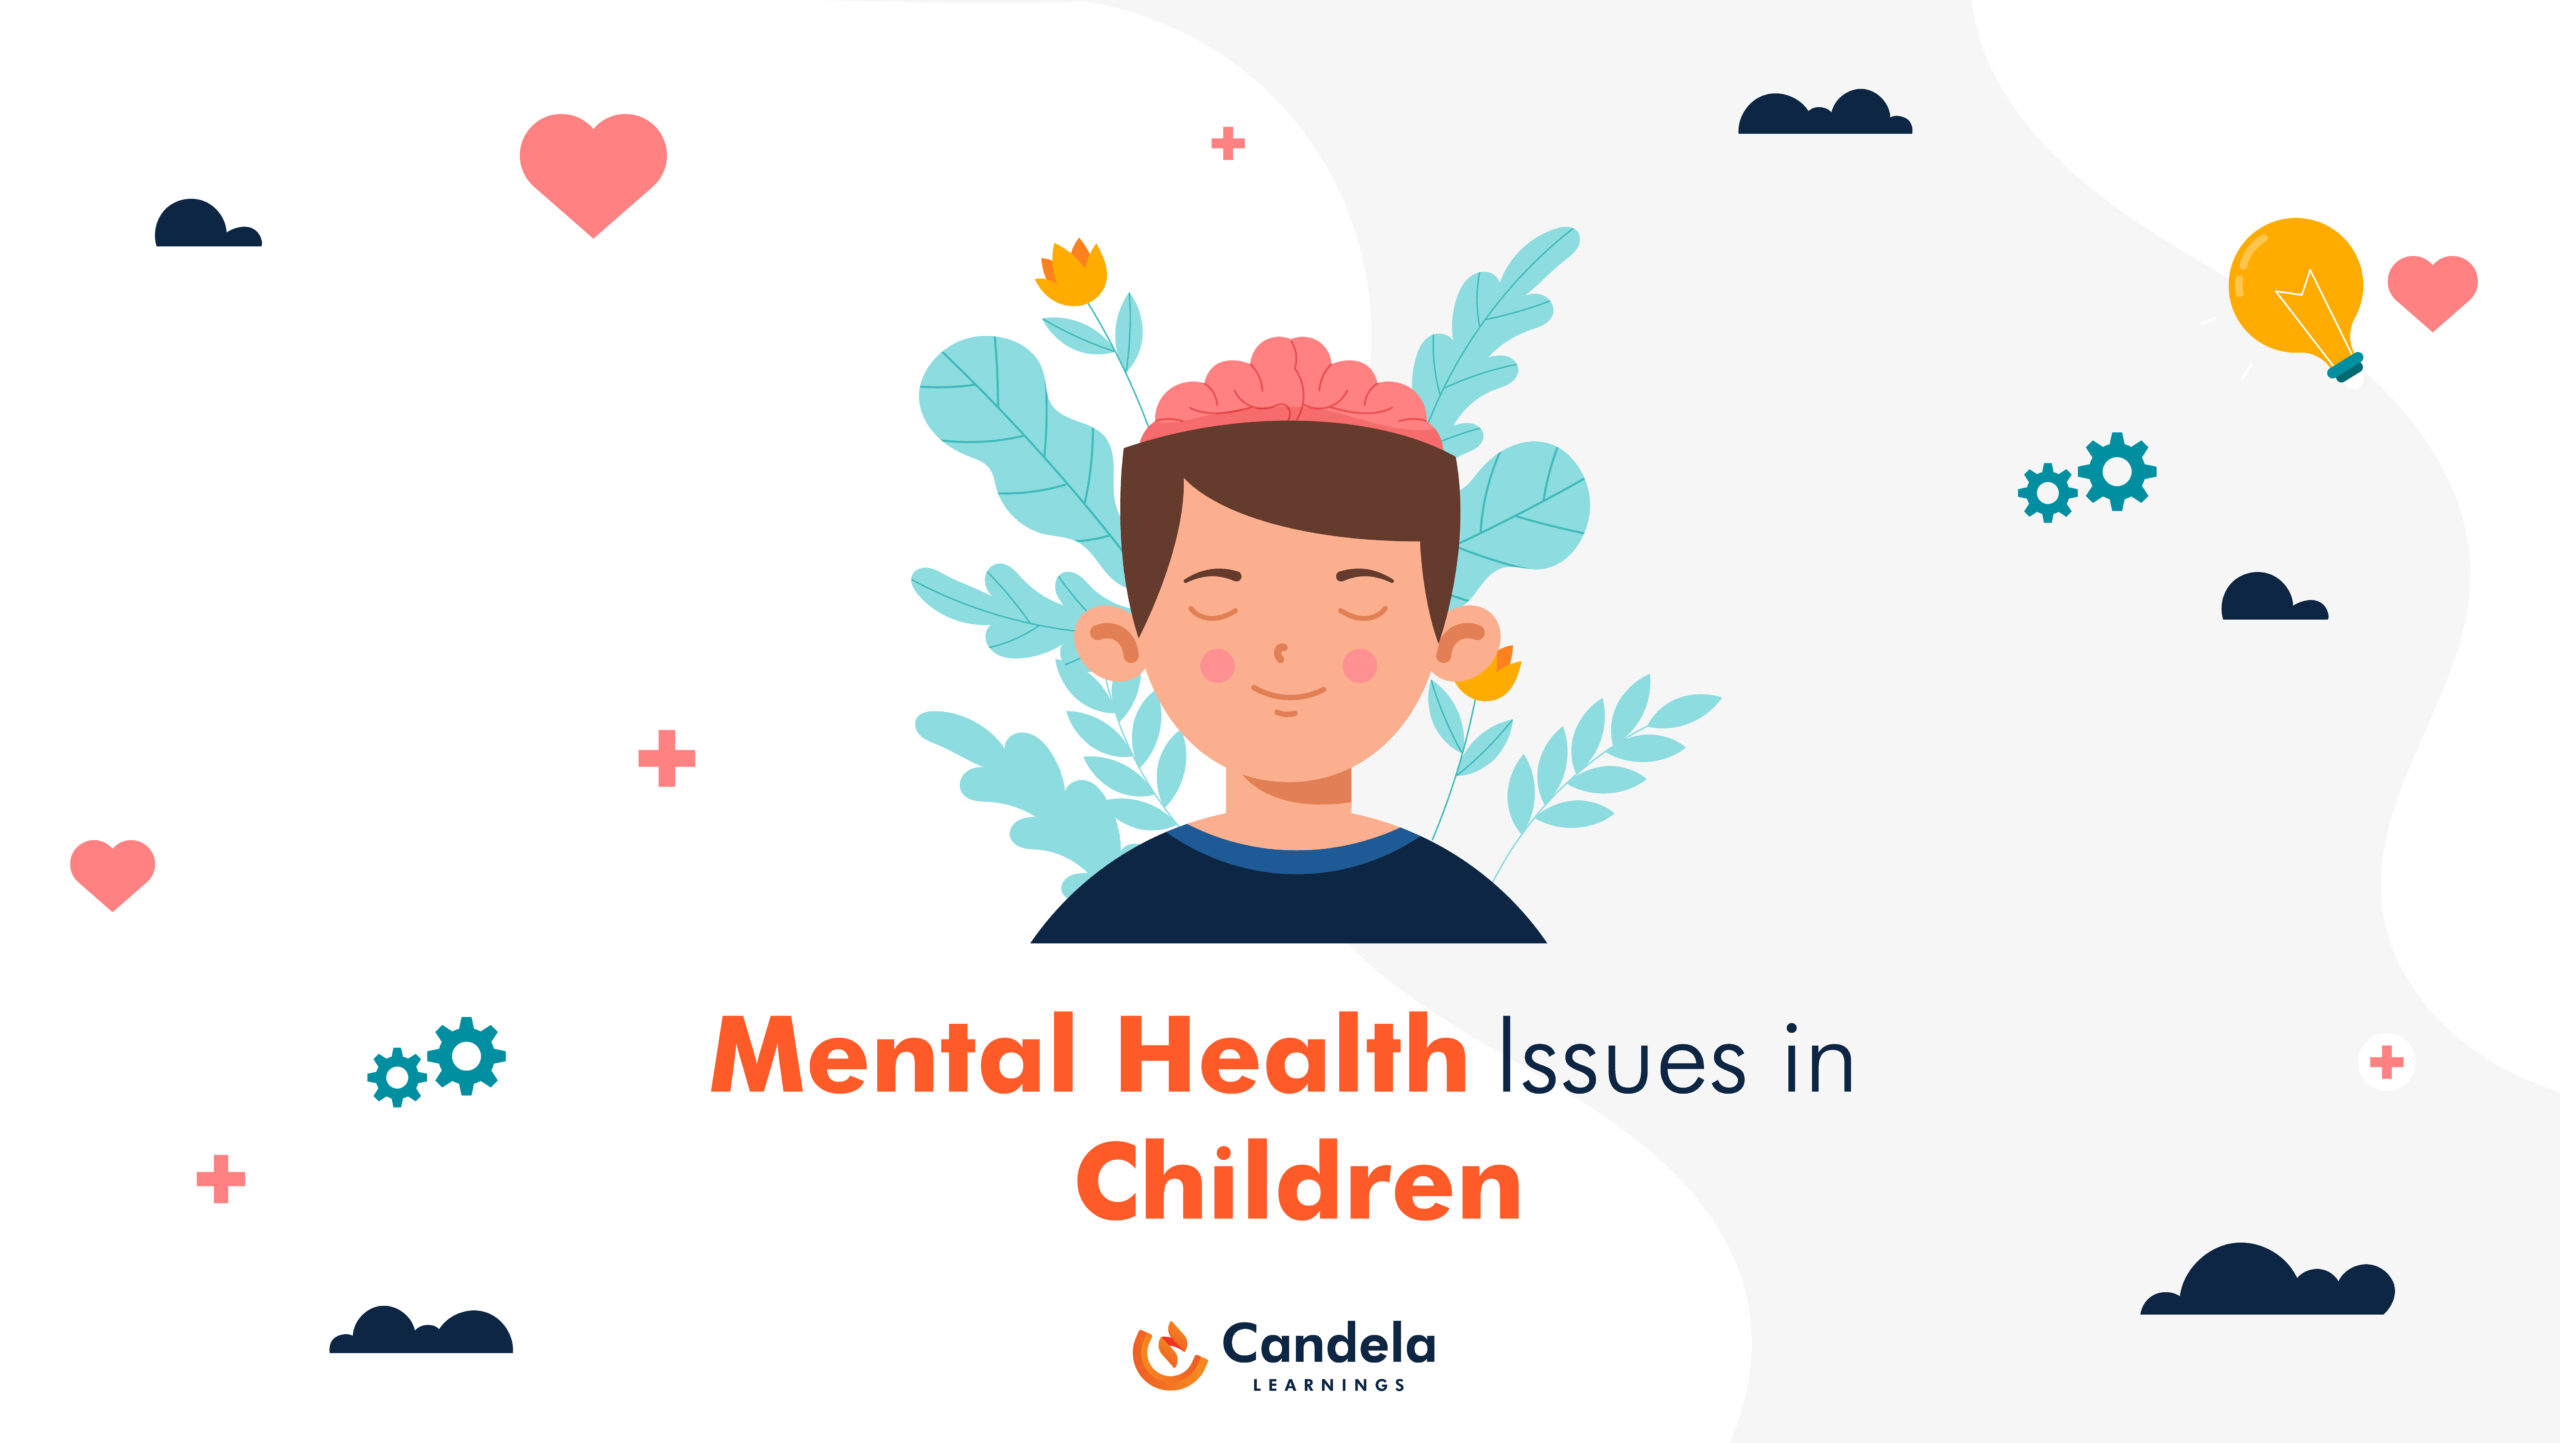 Mental health issues in children